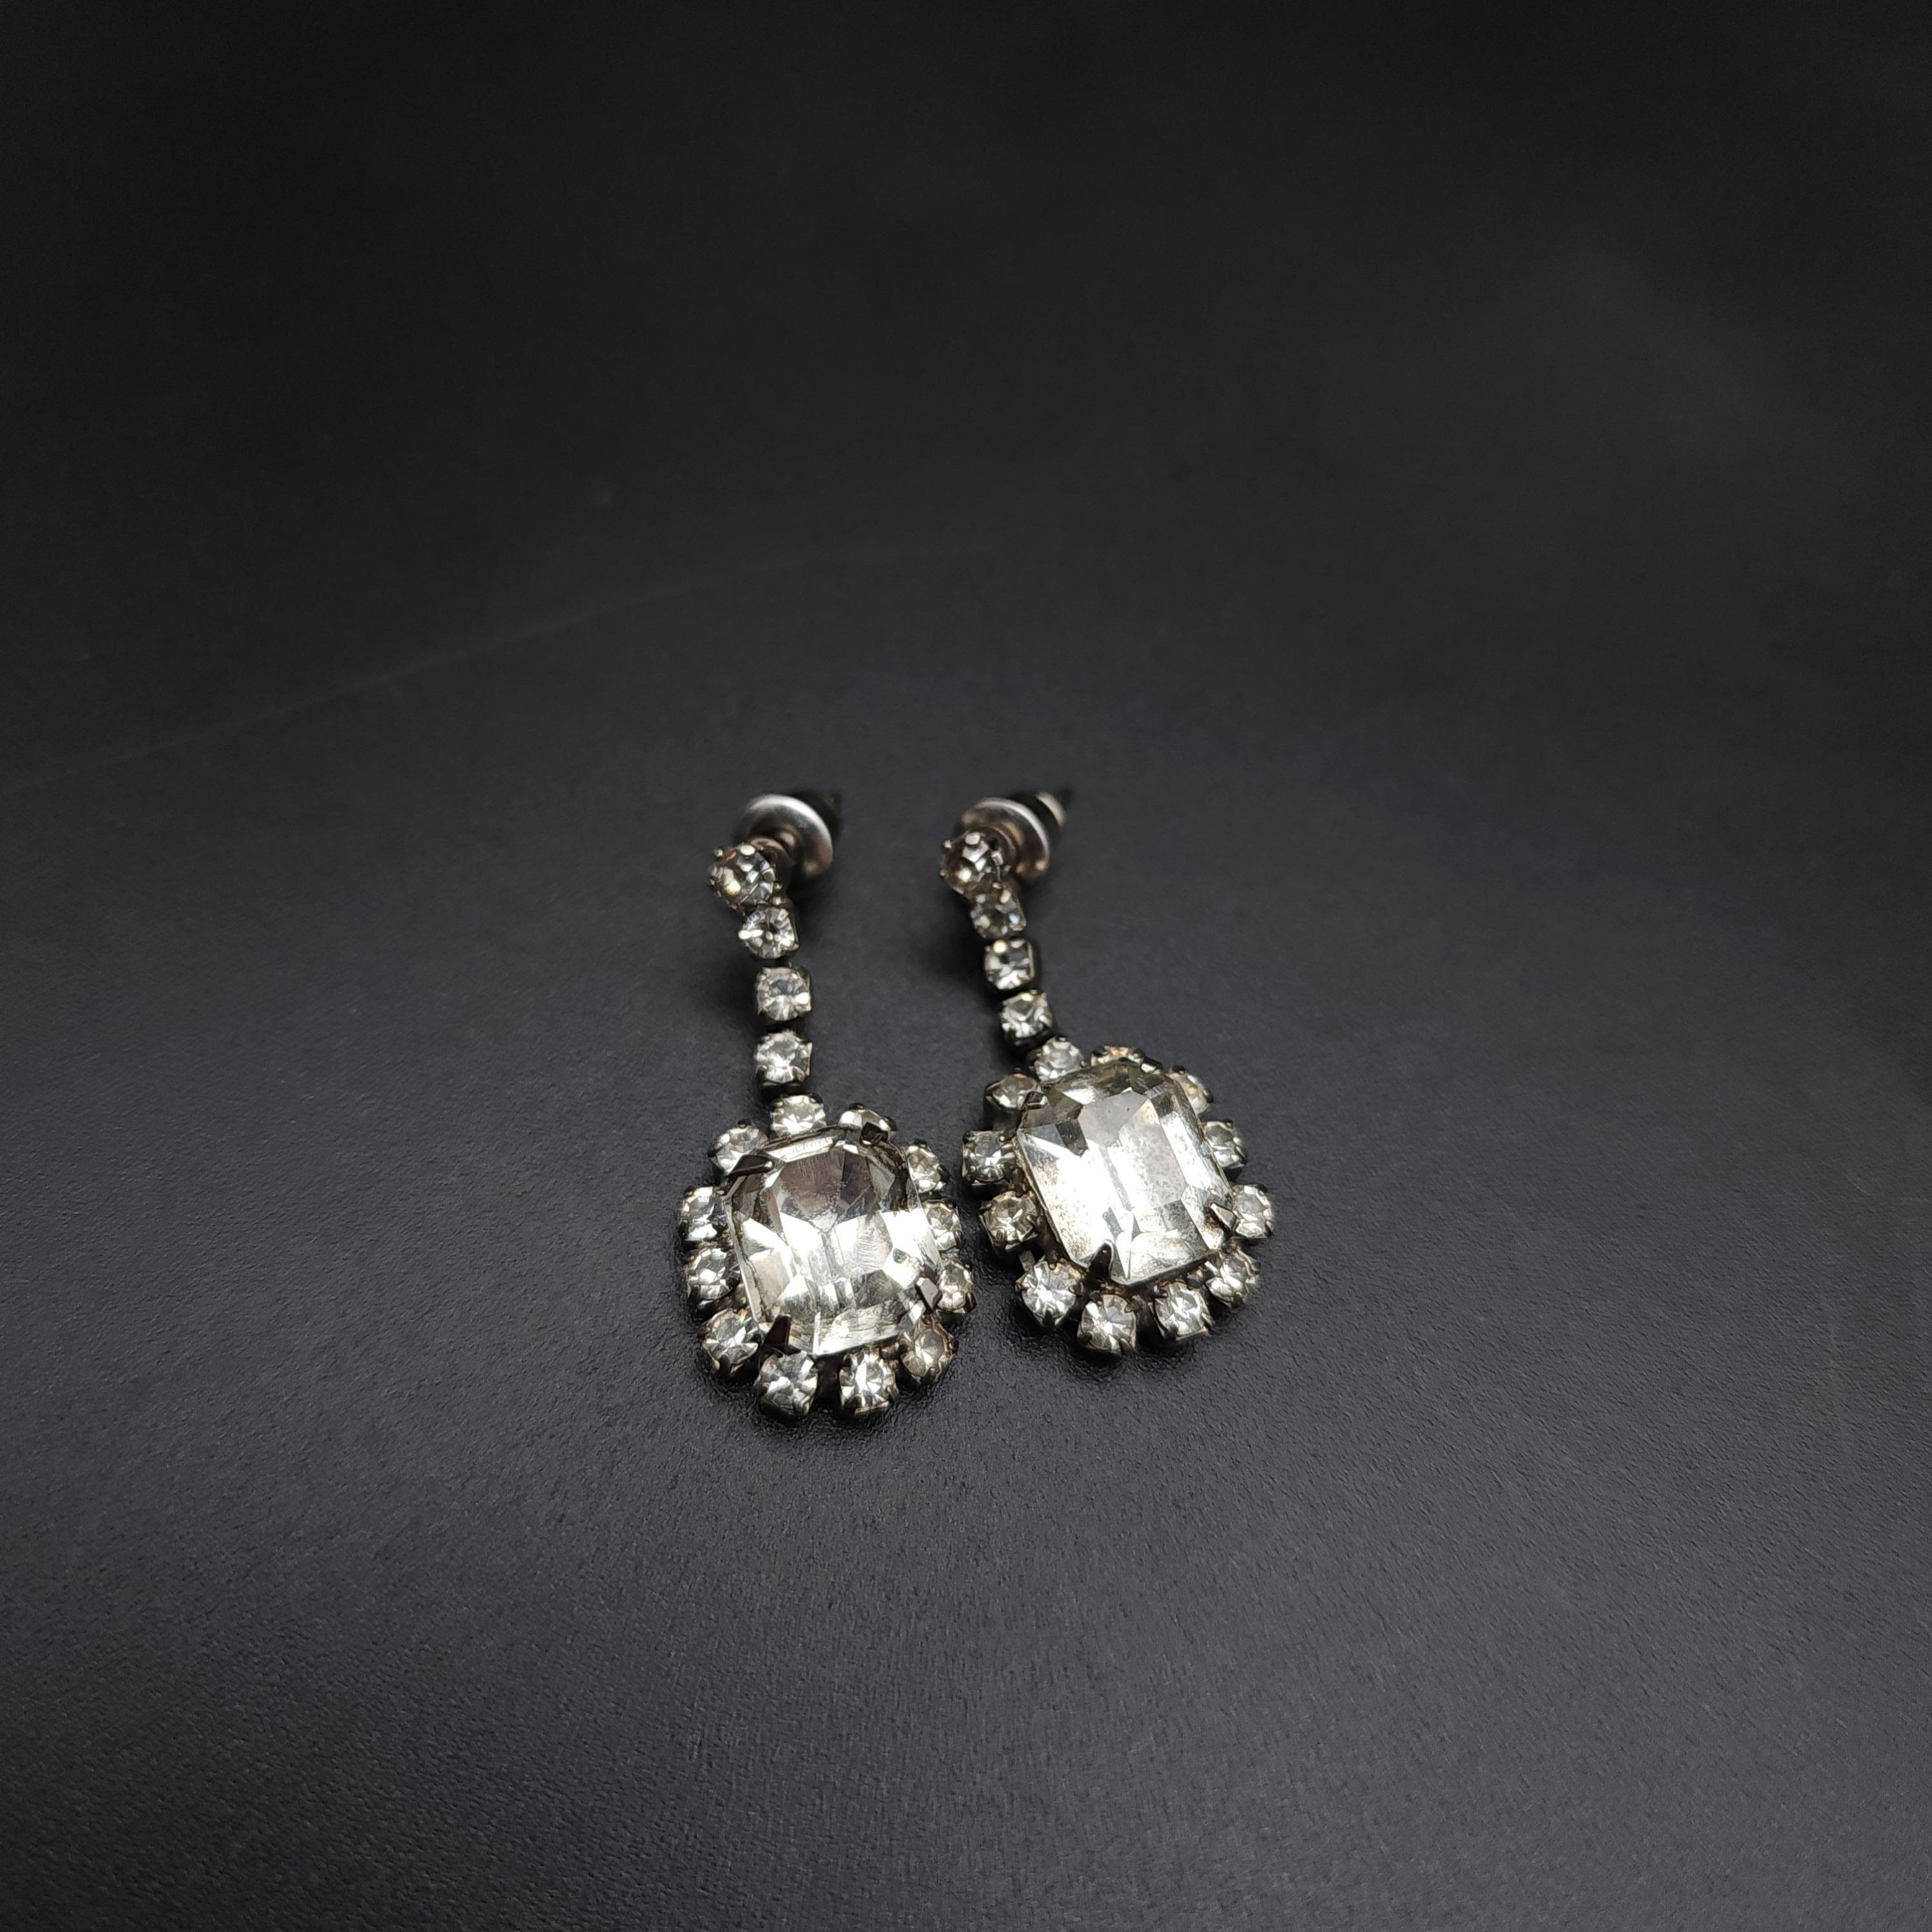 Dimensions: 3 cm length x 1.2 cm width at widest part, each earring

Add a dash of classic glamour to your look with the Retro Clear Crystal Dangle Earrings. These stunning earrings feature a square cut centerpiece, beautifully prong-set to catch